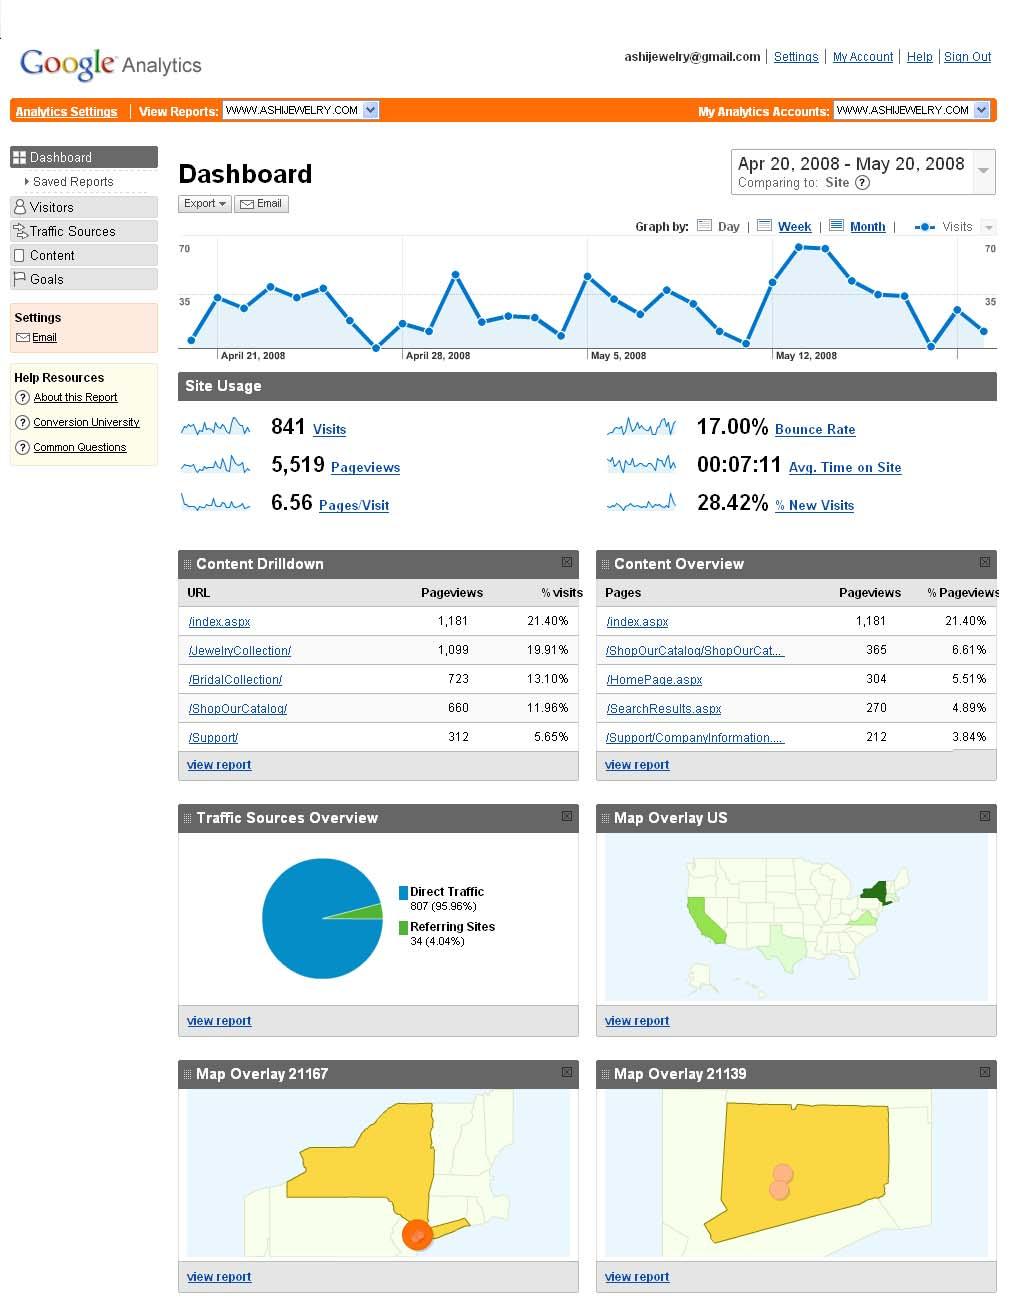 9) Google Analytics Dashboard On pressing View Reports link, you will be redirected to Dashboard where you can view reports and update your Email Settings.